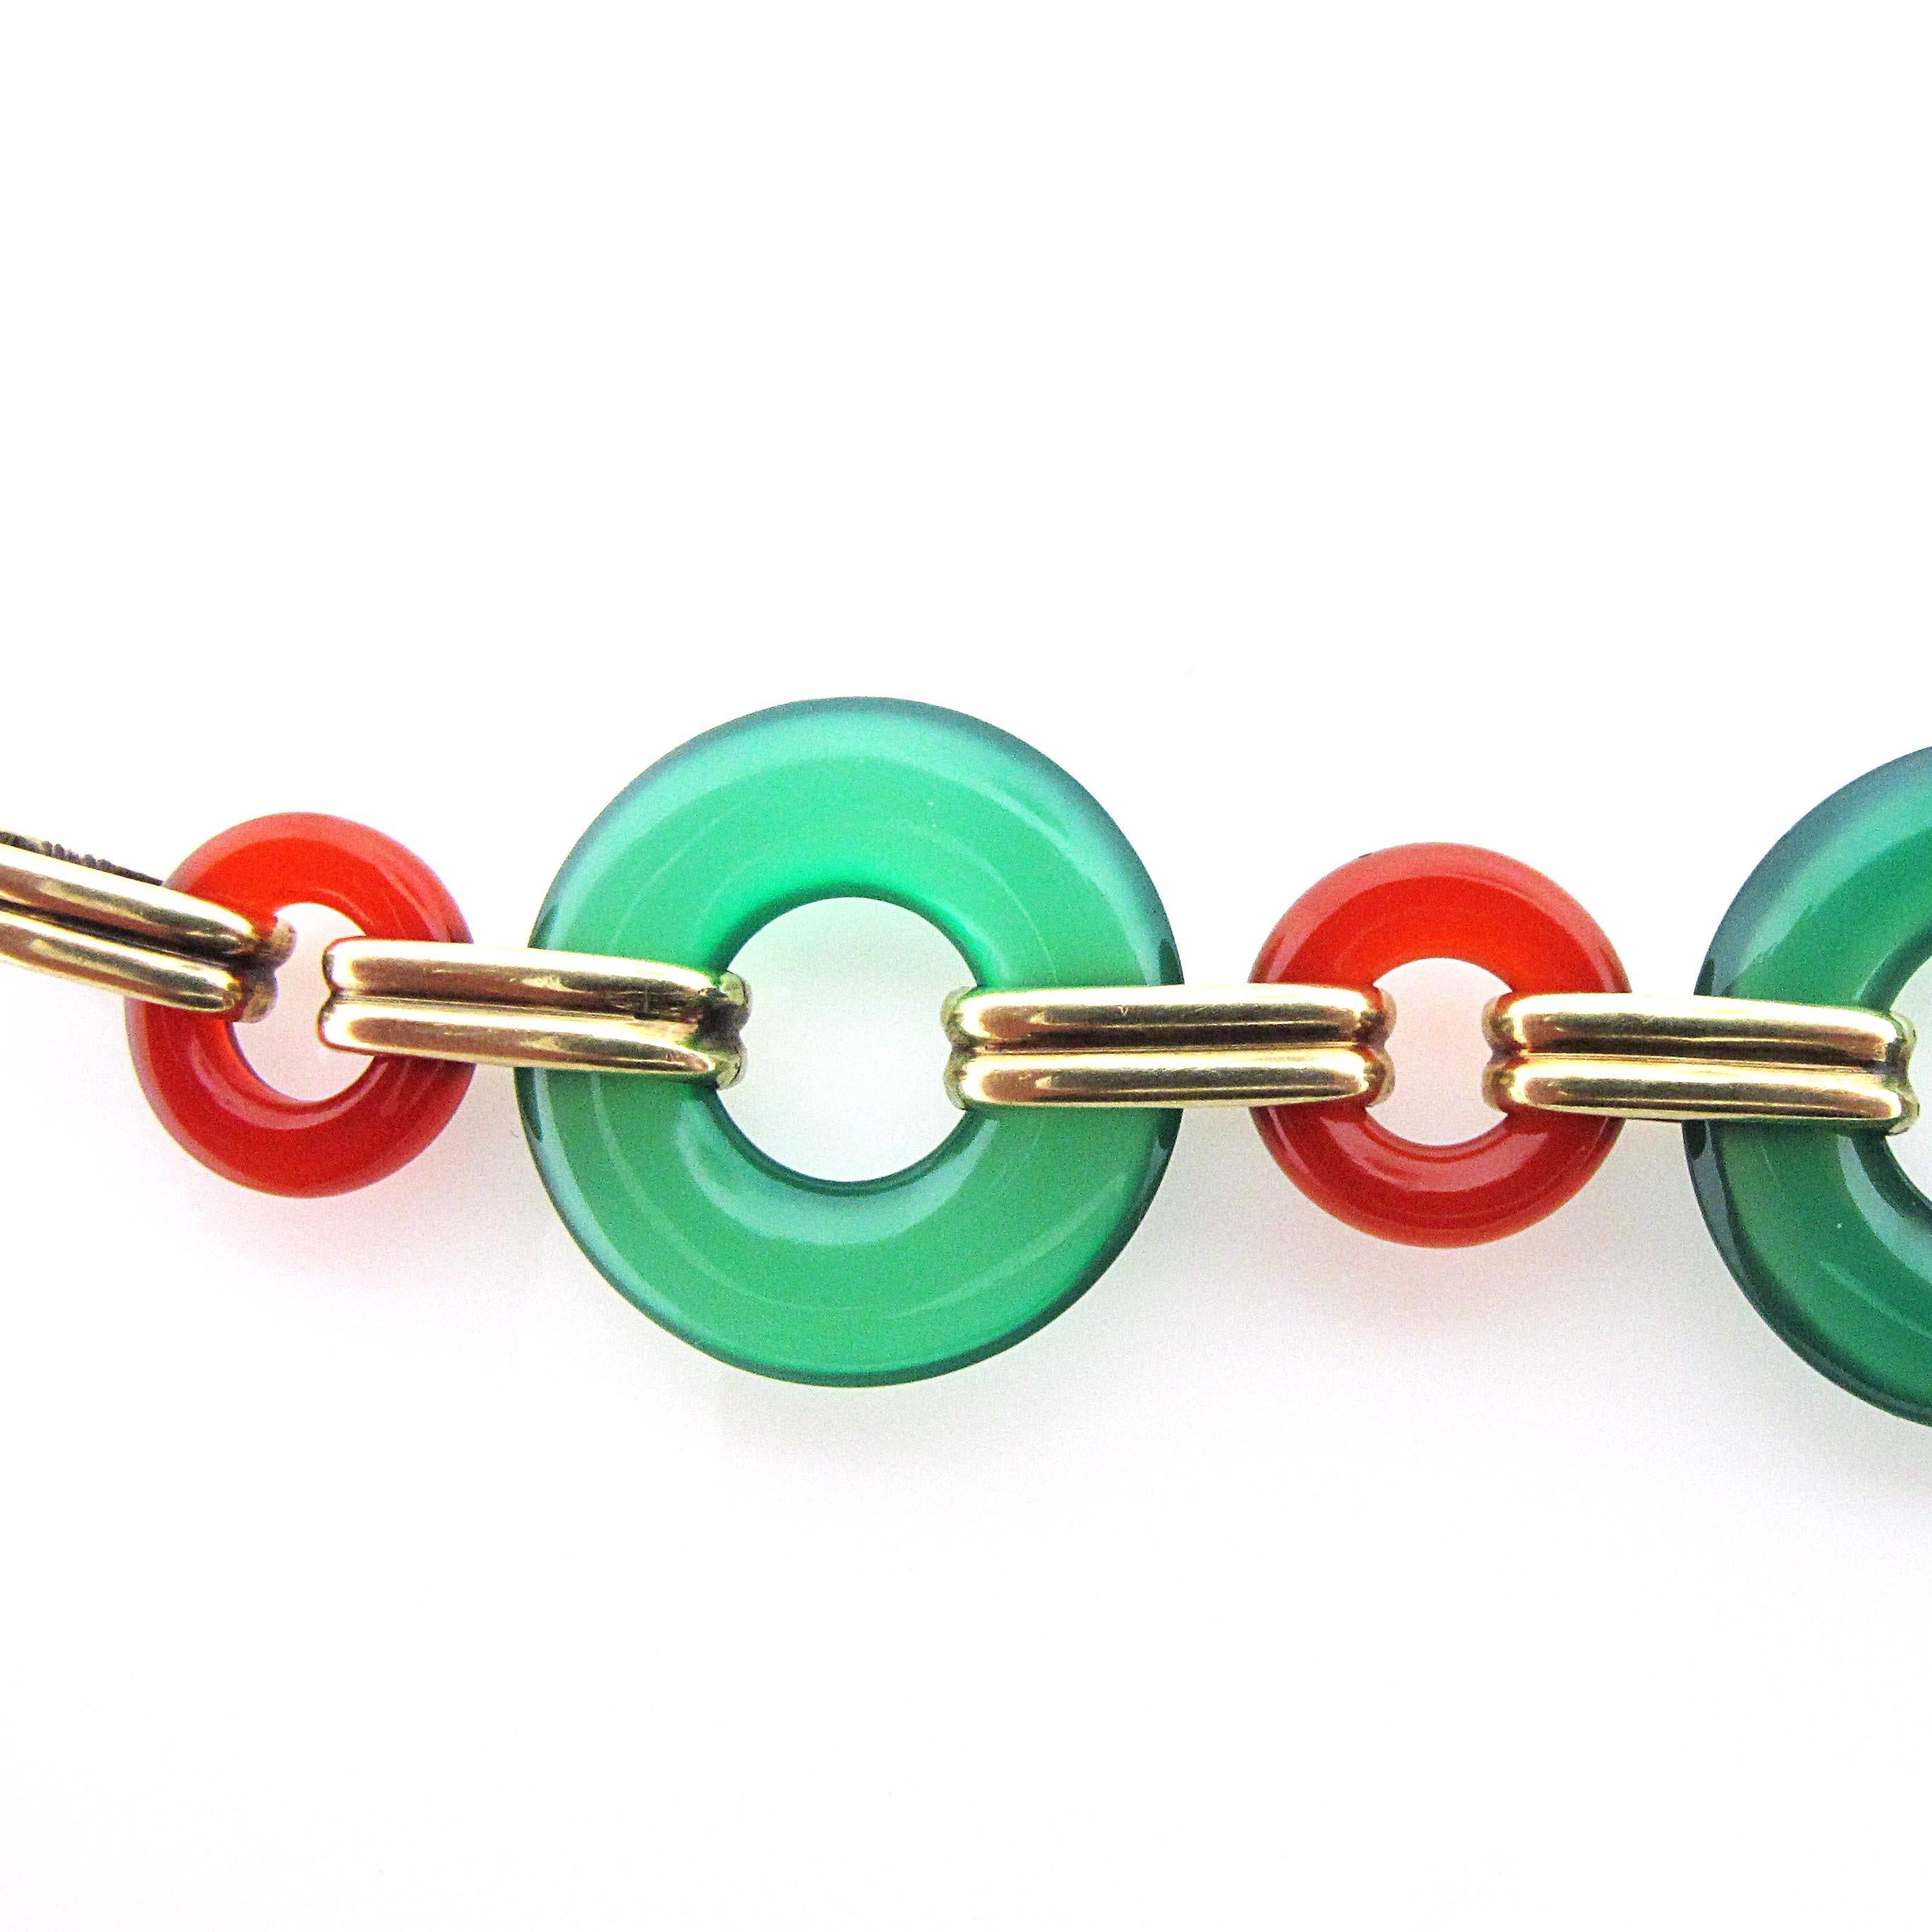 green and gold bracelet